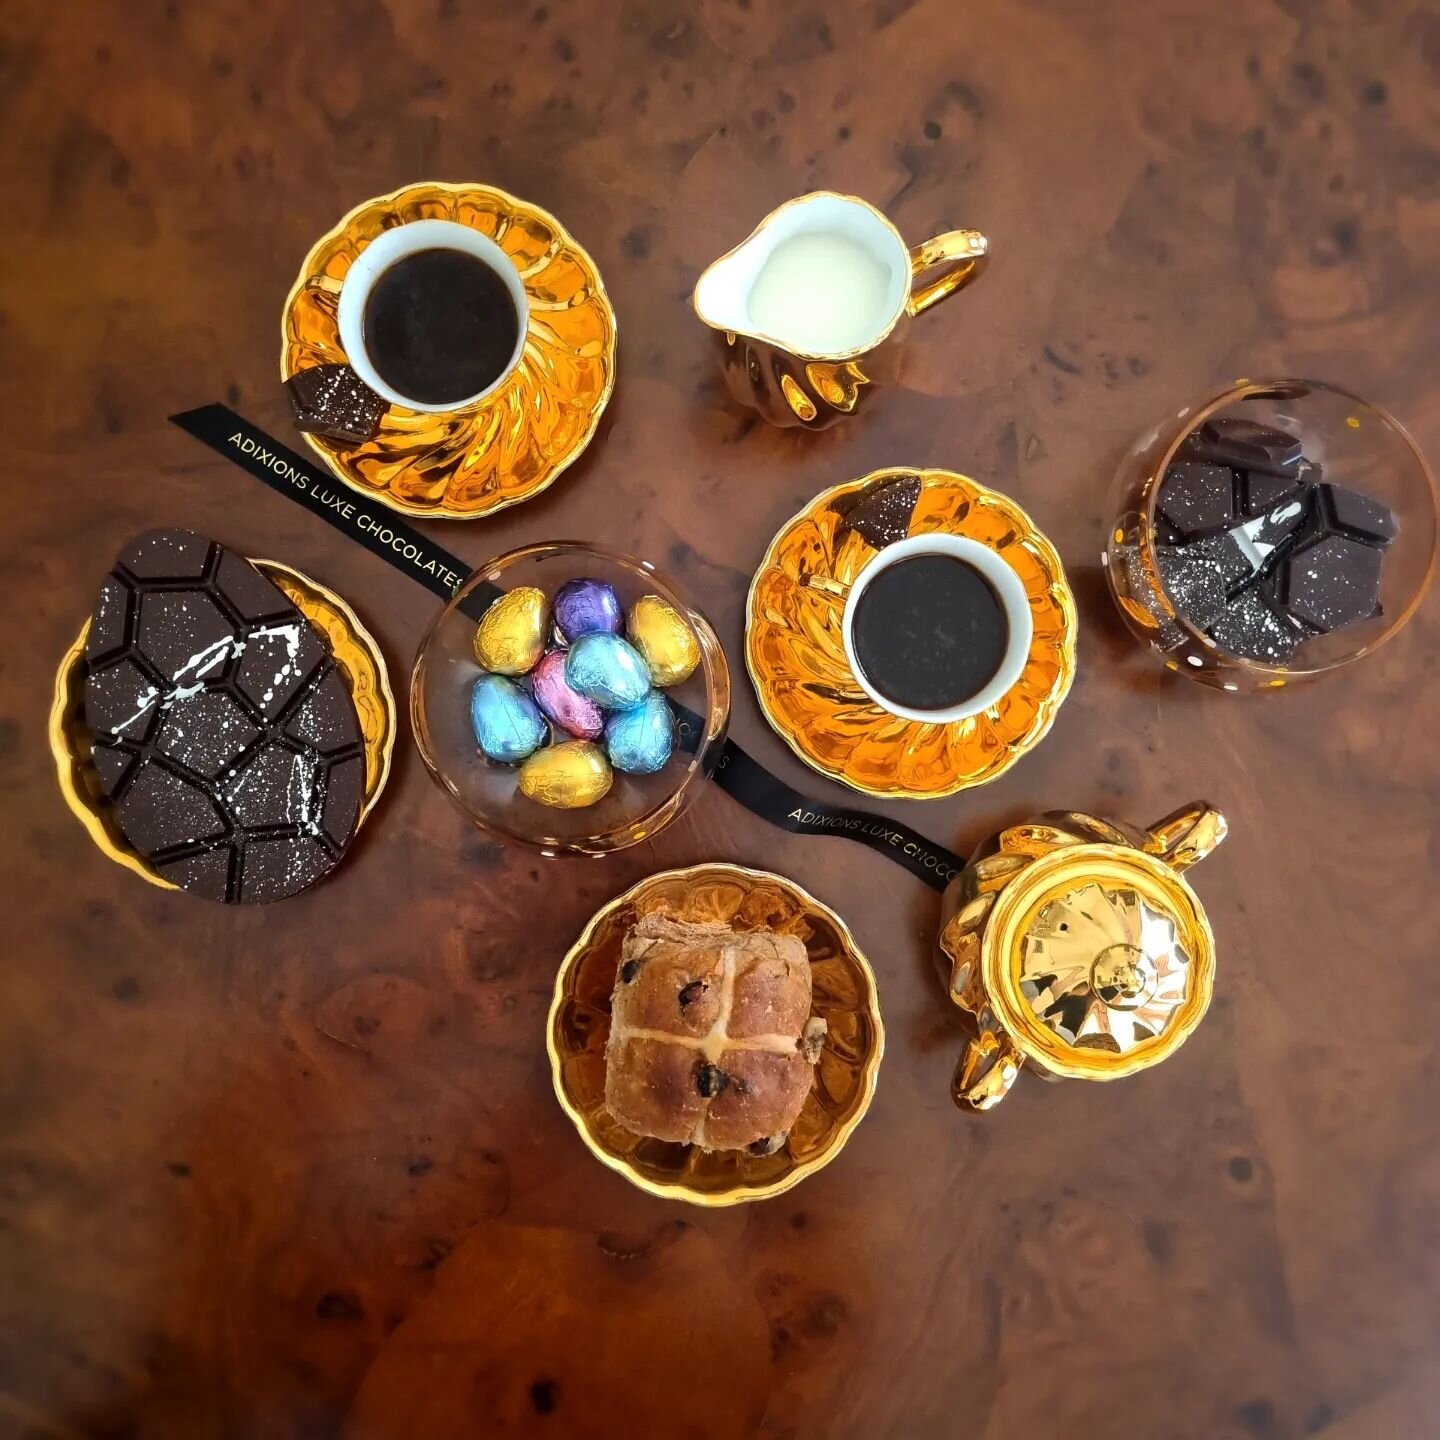 Happy Easter to all celebrating today! We hope you are enjoying simple pleasures and of course indulging in some premium chocolate..🐇❤️🐣🍫

I get to celebrate Easter in a month's time, every few years our Easters do overlap, in the meantime I kind 